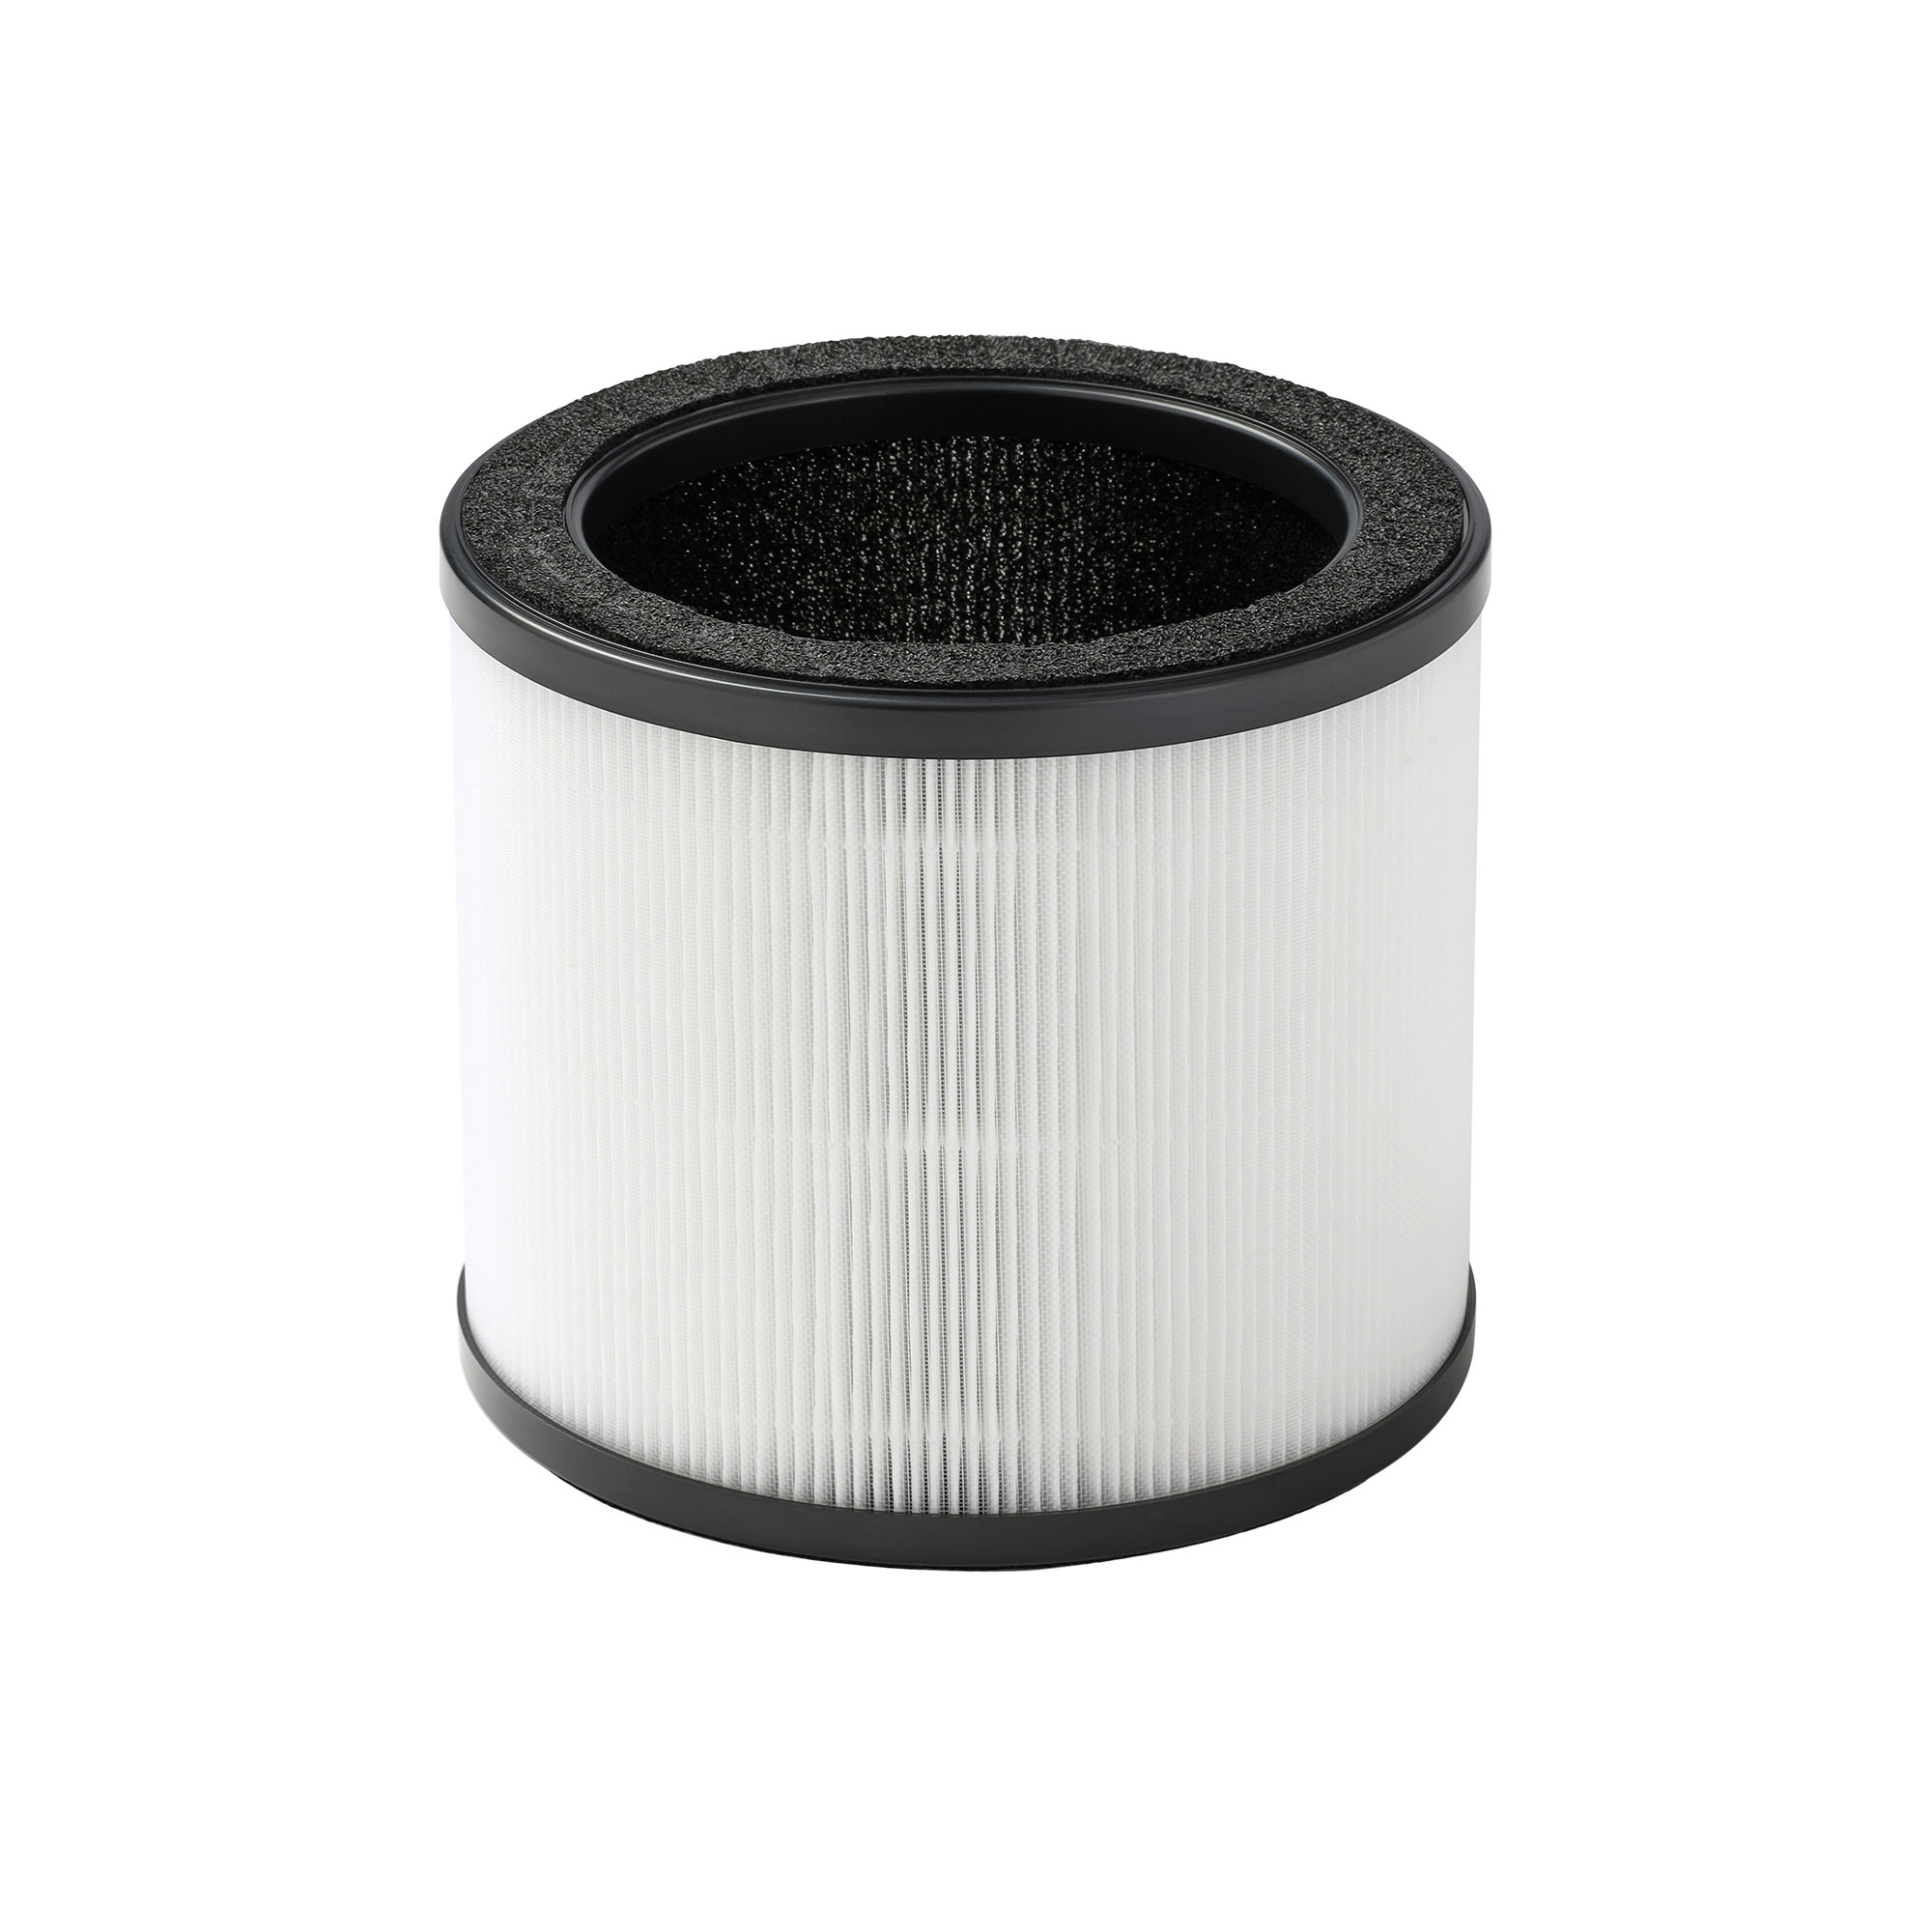 Sunbeam Fresh Protect Replacement Filter for SAP0900WH Image 1